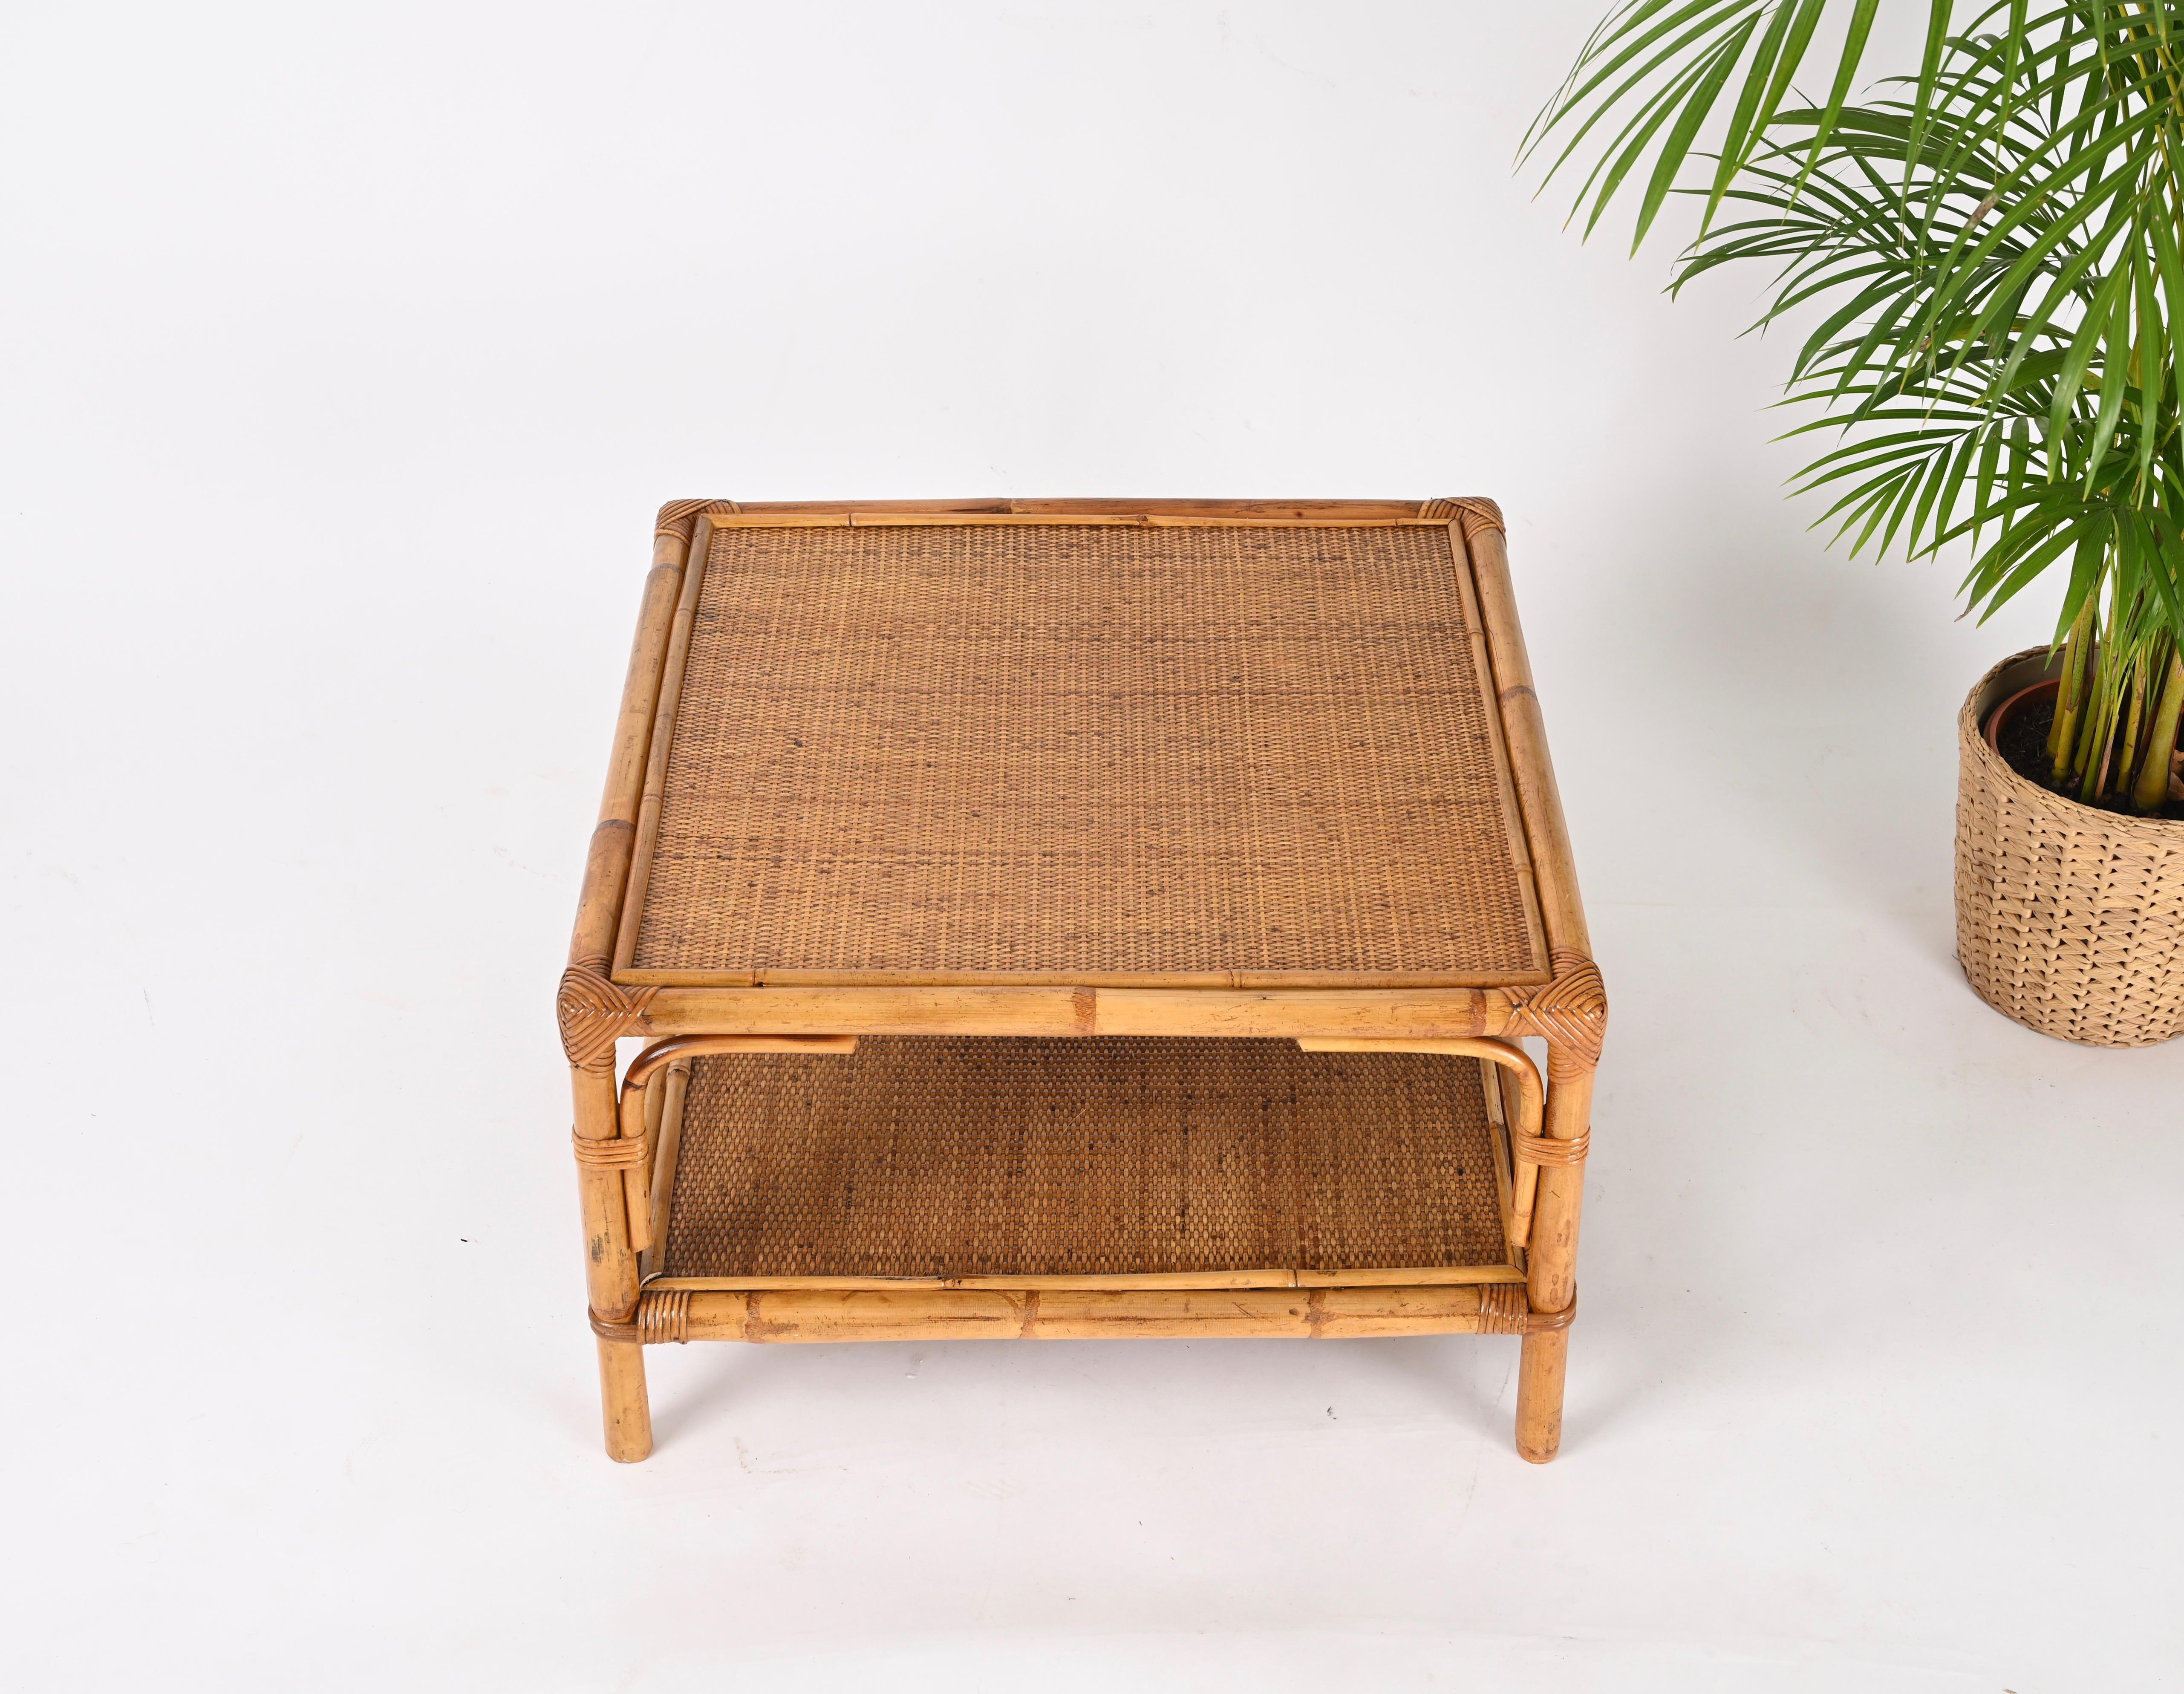 Vivai del Sud Midcentury Italian Square Coffee Table in Bamboo and Rattan, 1970s For Sale 5